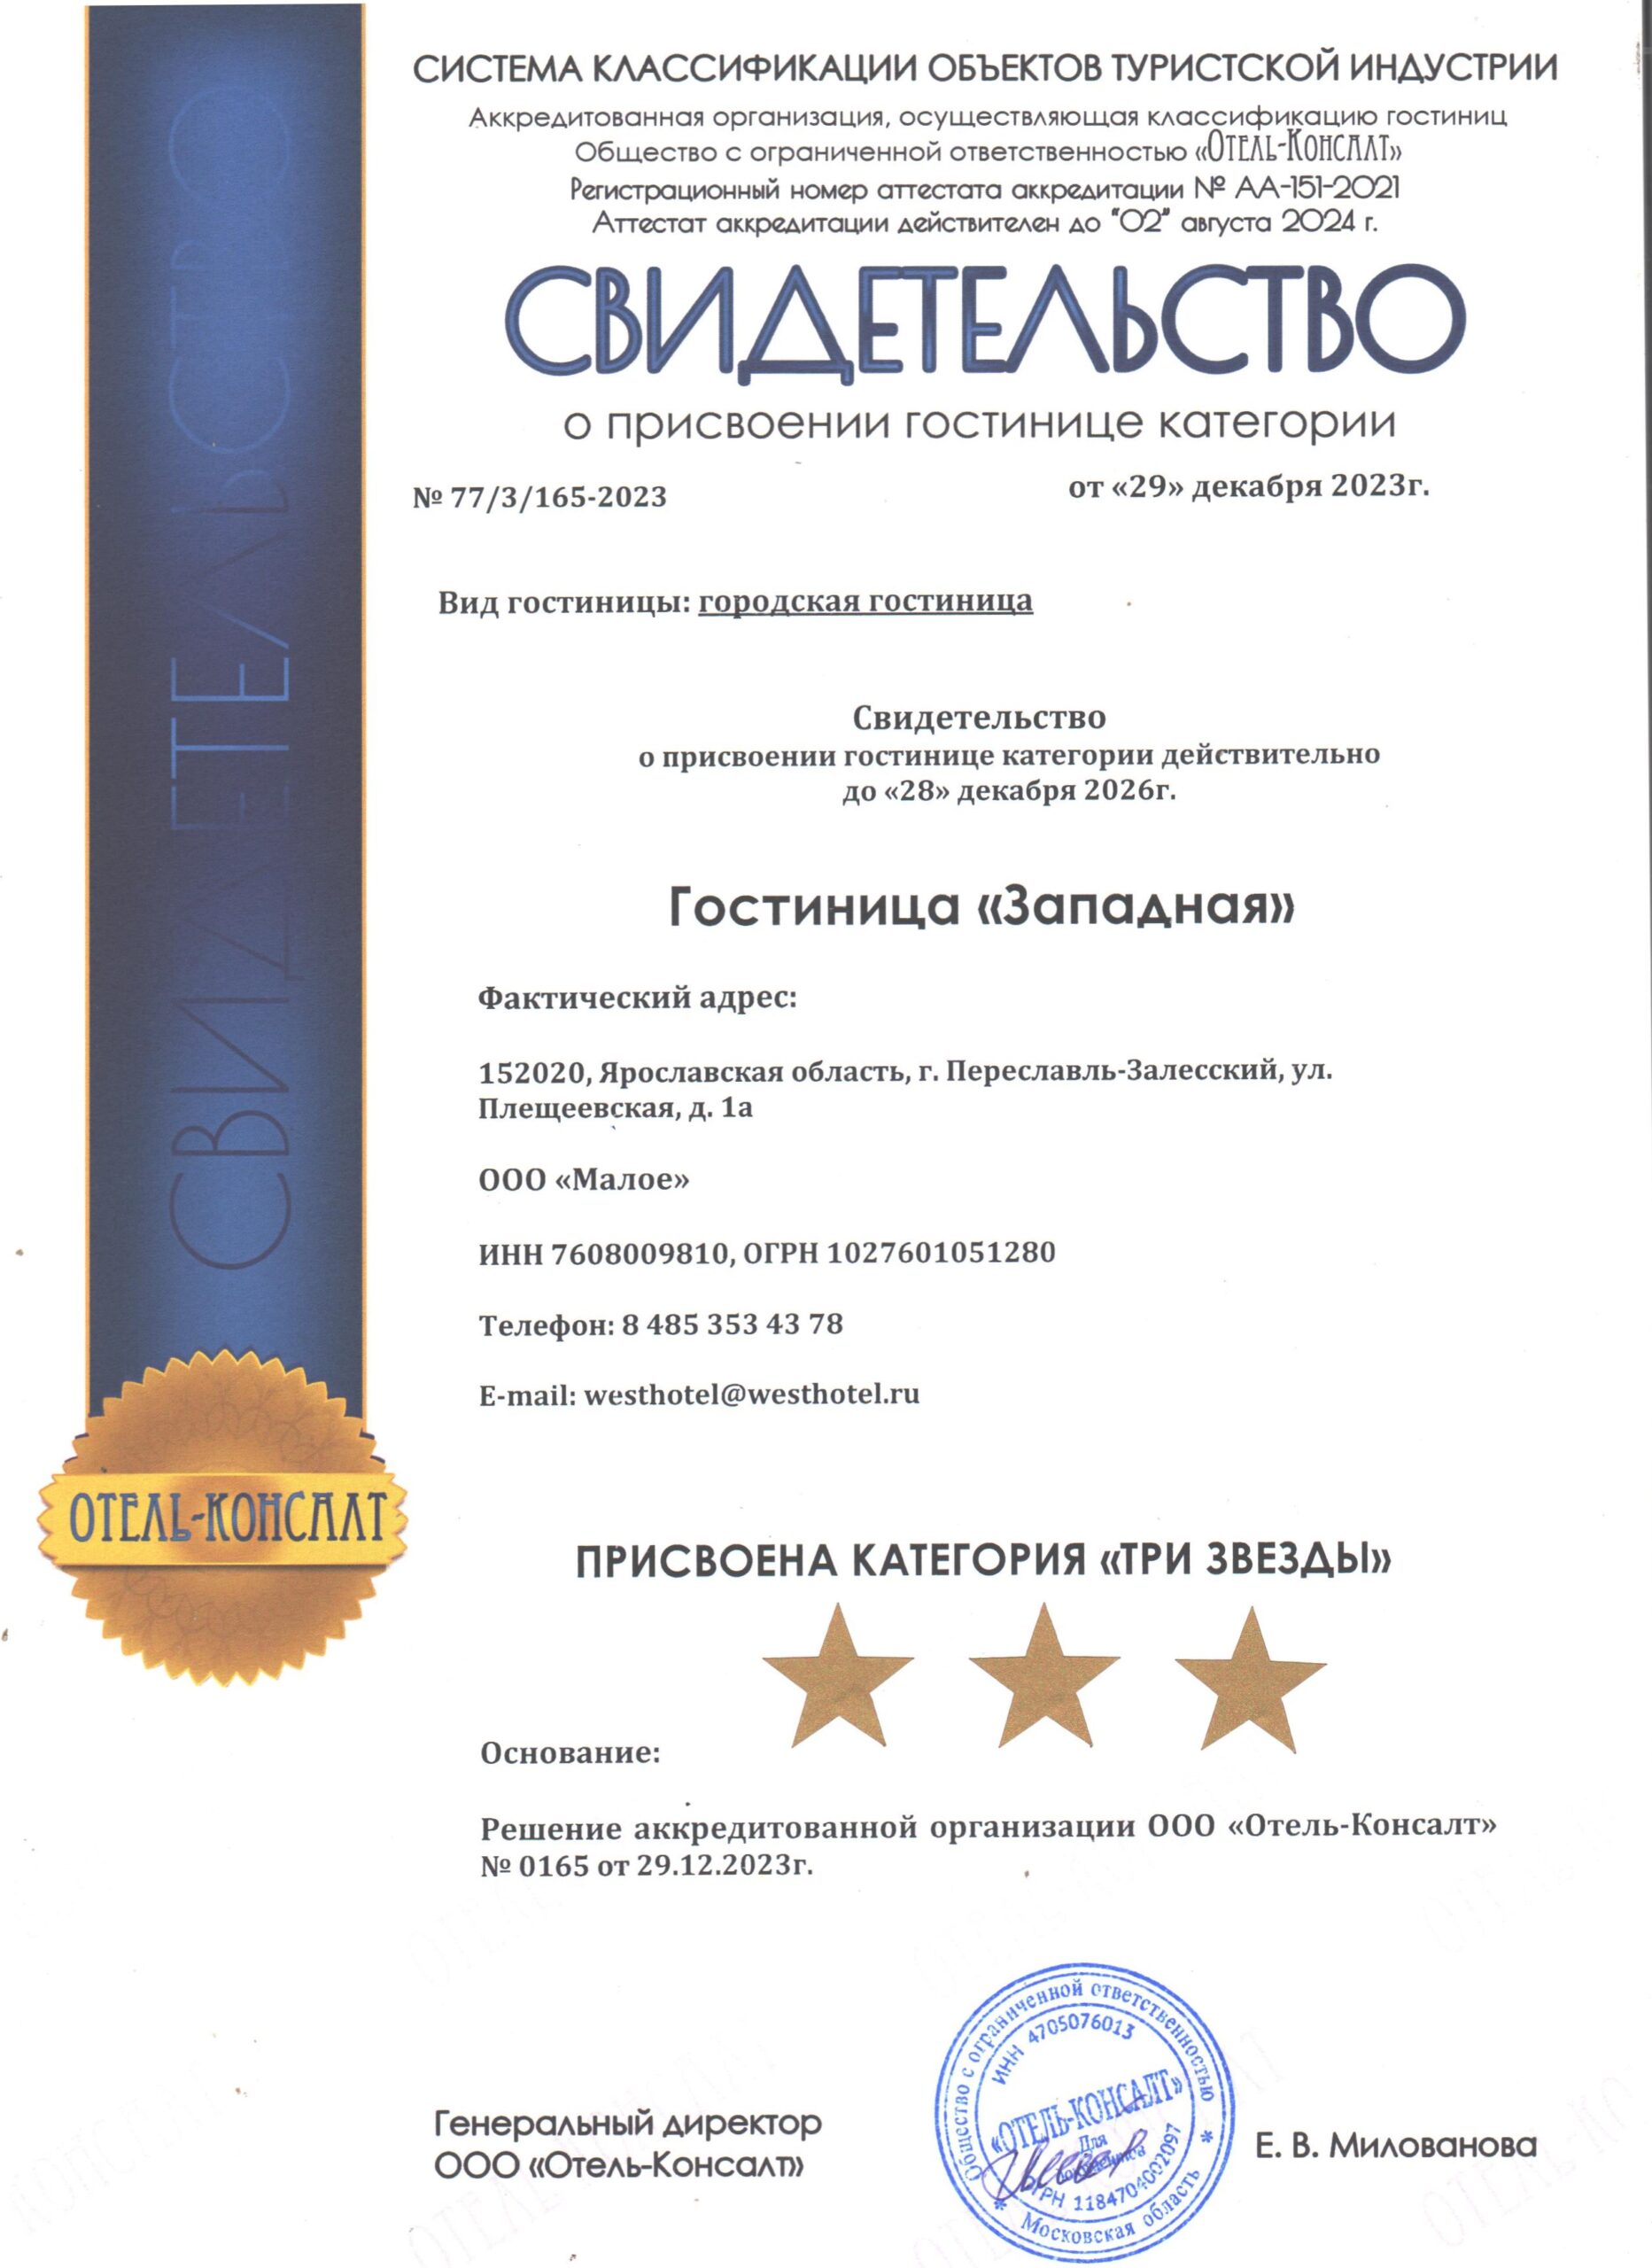 A “Three Stars” category was awarded to our hotel